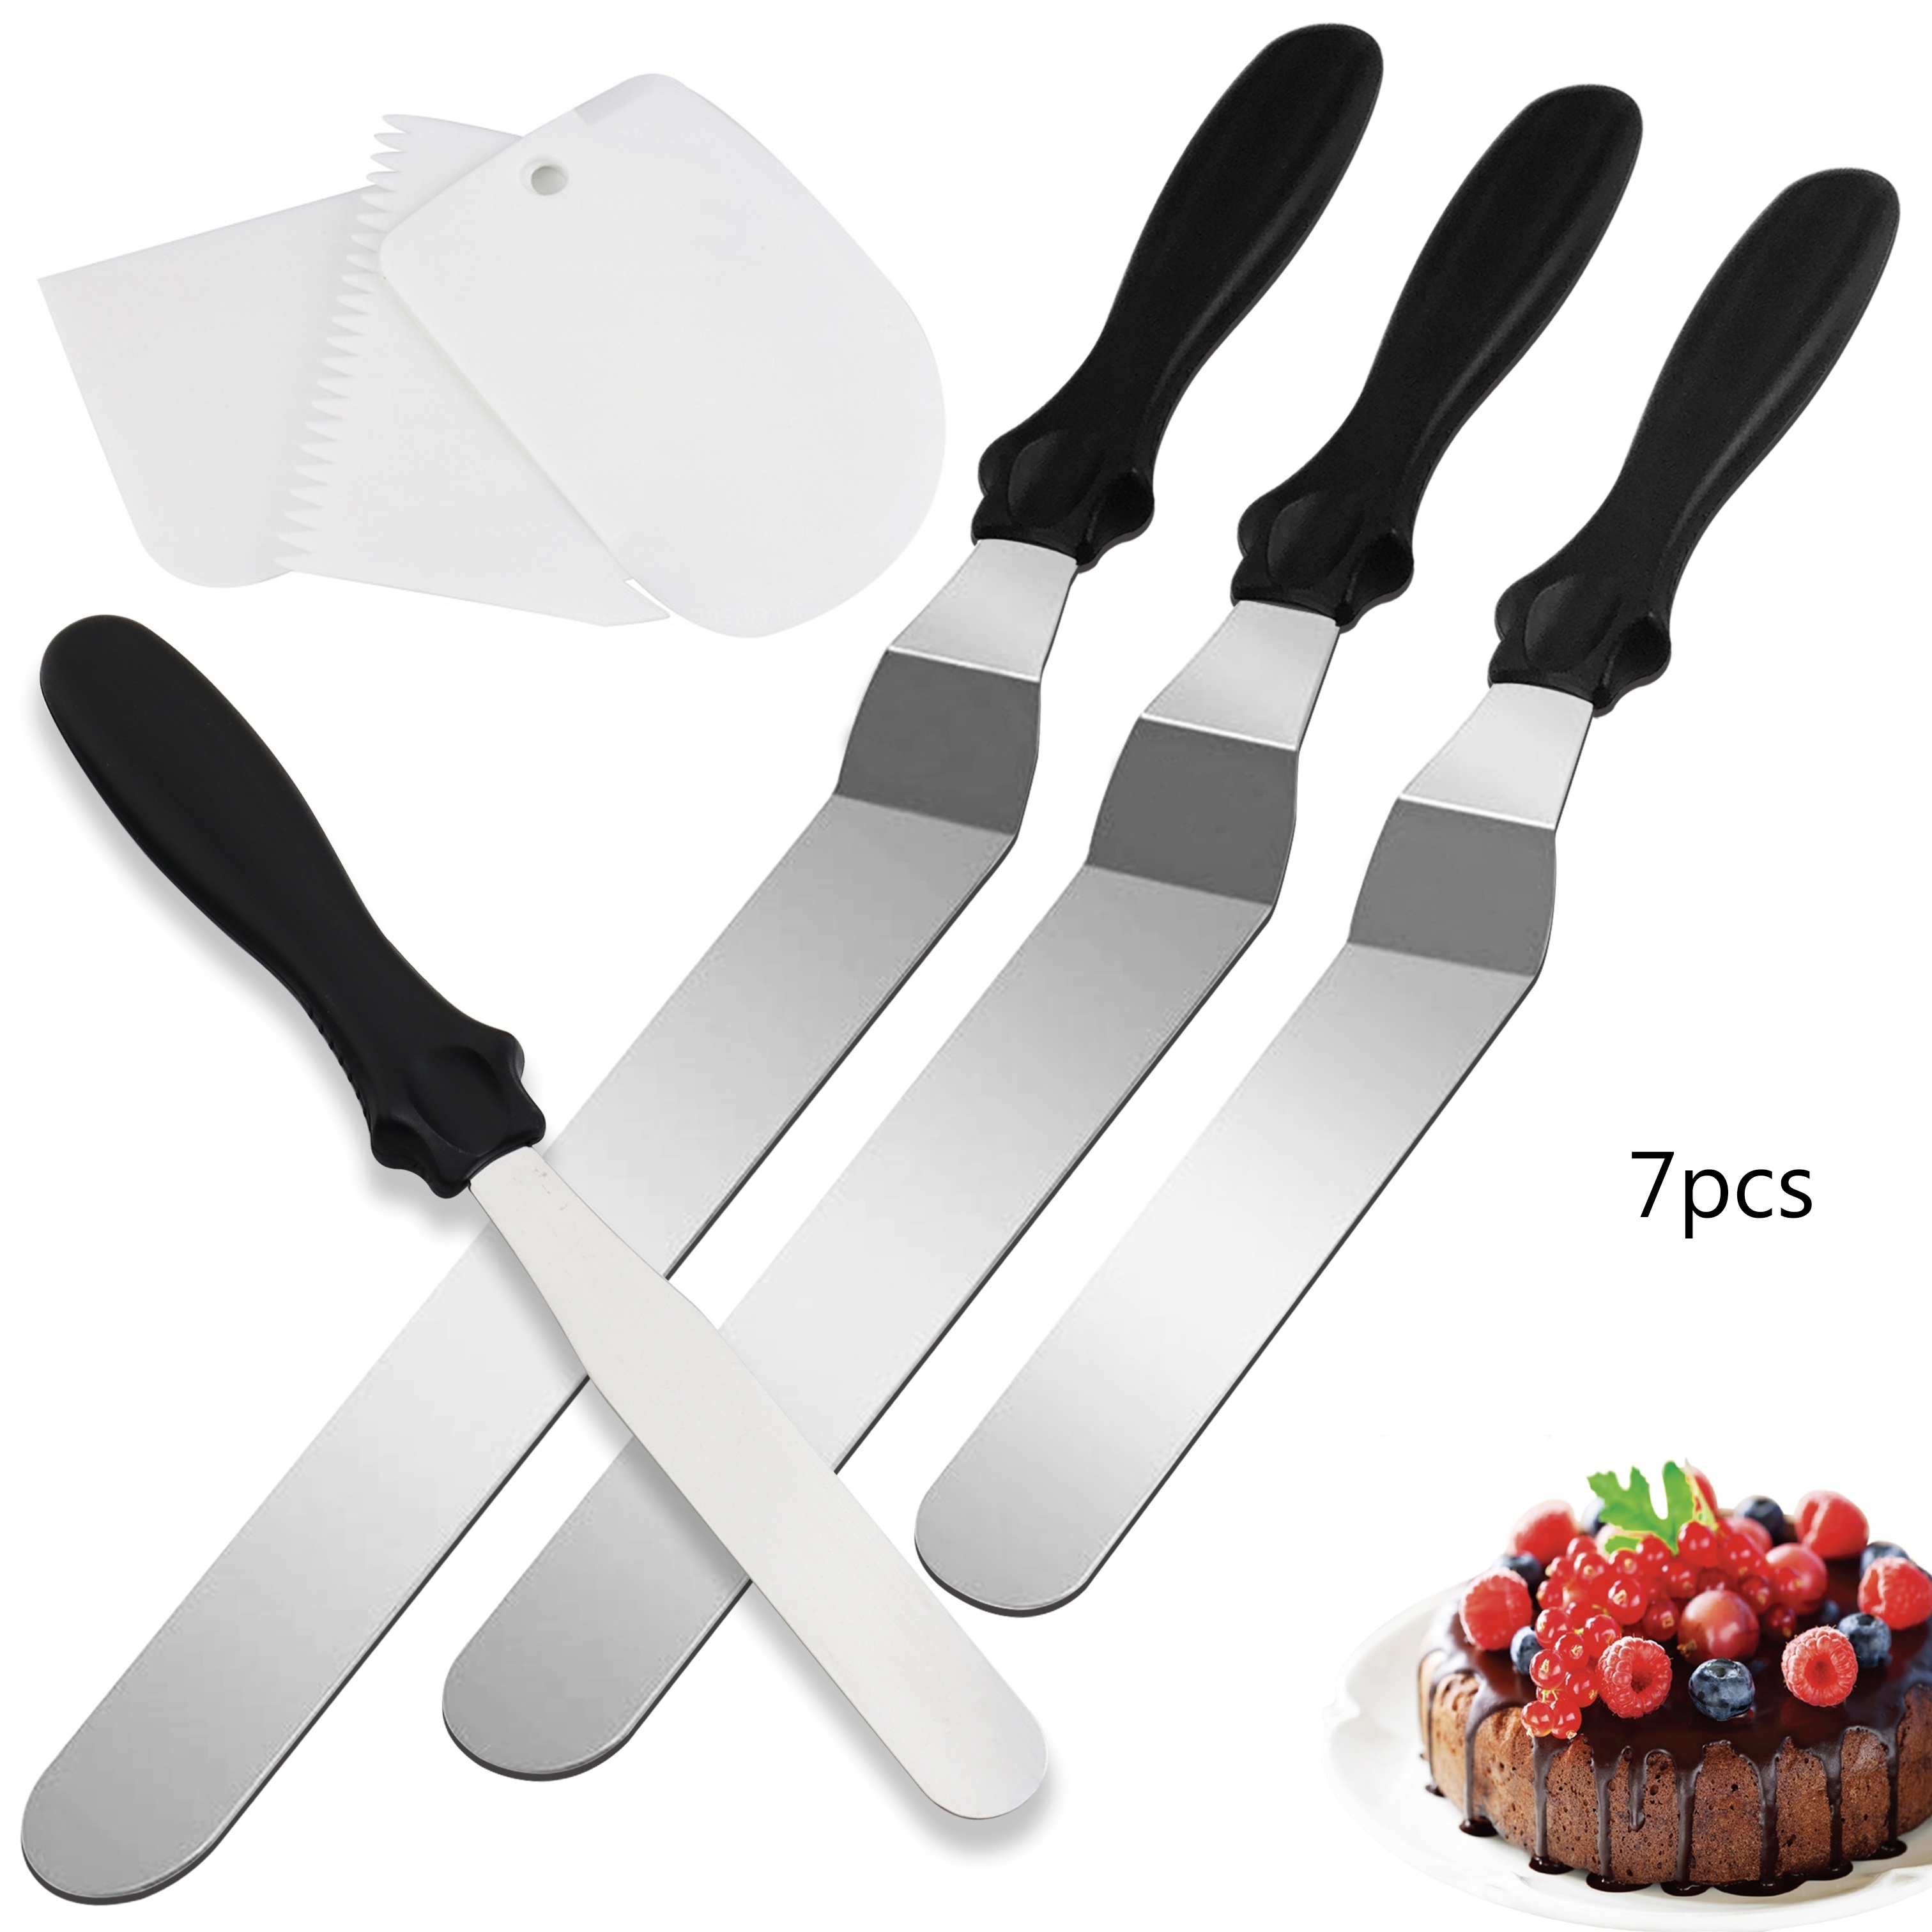 Dropship Stainless Steel Scraper Cake Icing Smoother Four Sided Scraper  Cake Decorating Comb Baking Tool to Sell Online at a Lower Price